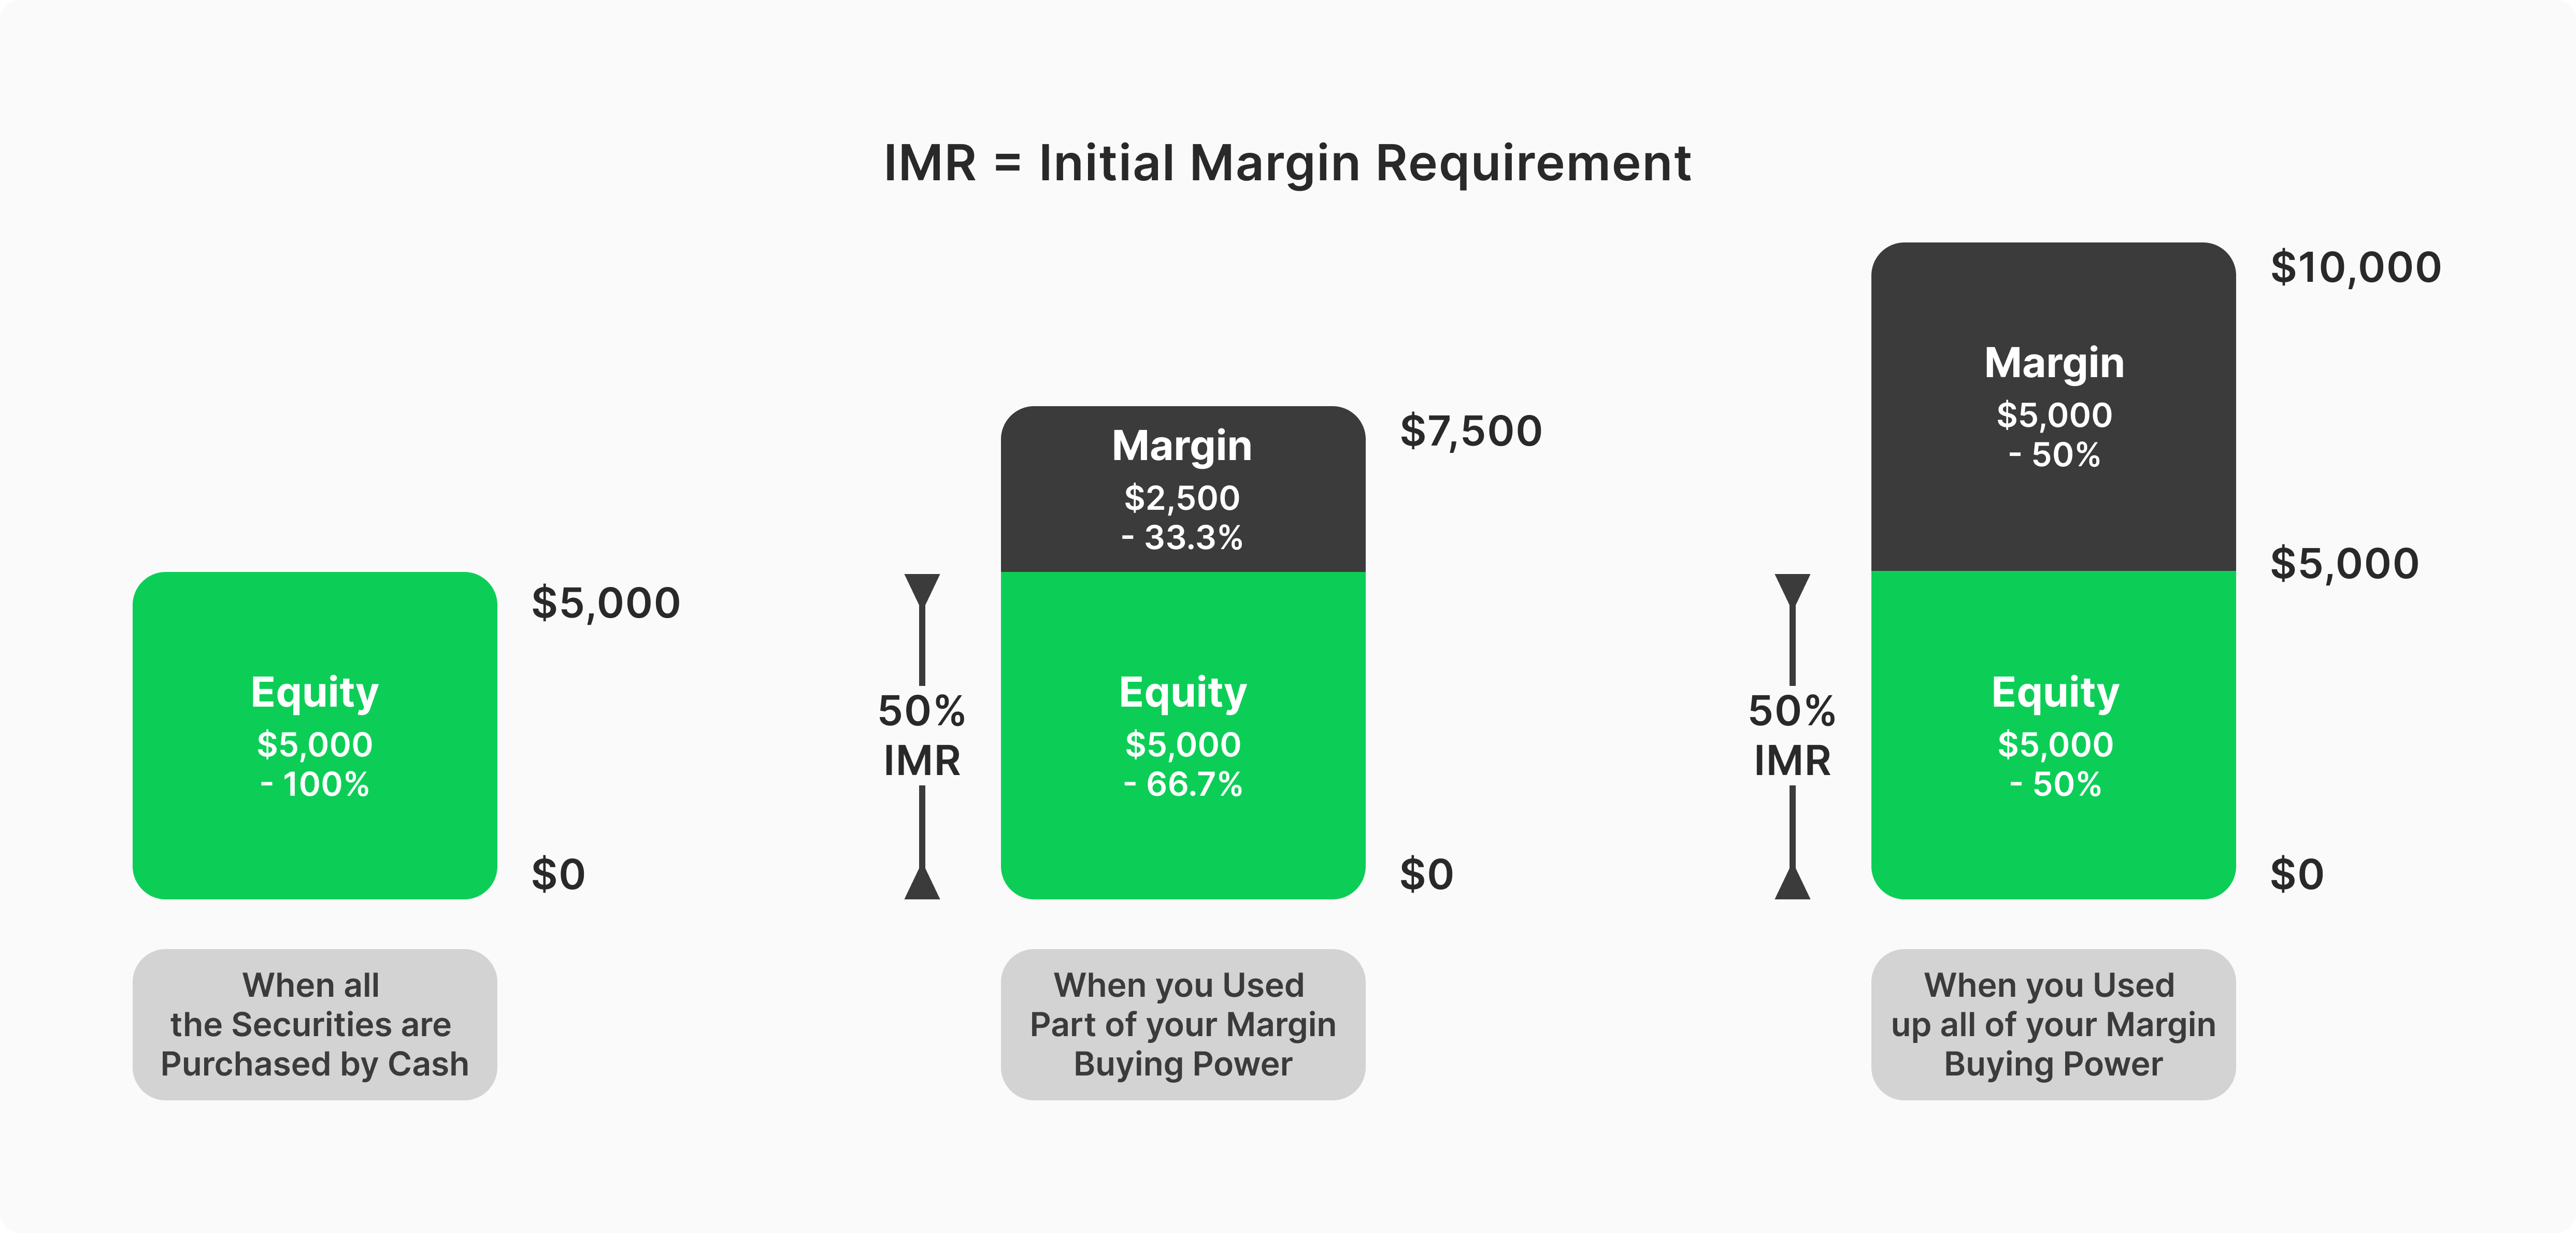 Correlation between the amount traded and the required margin level